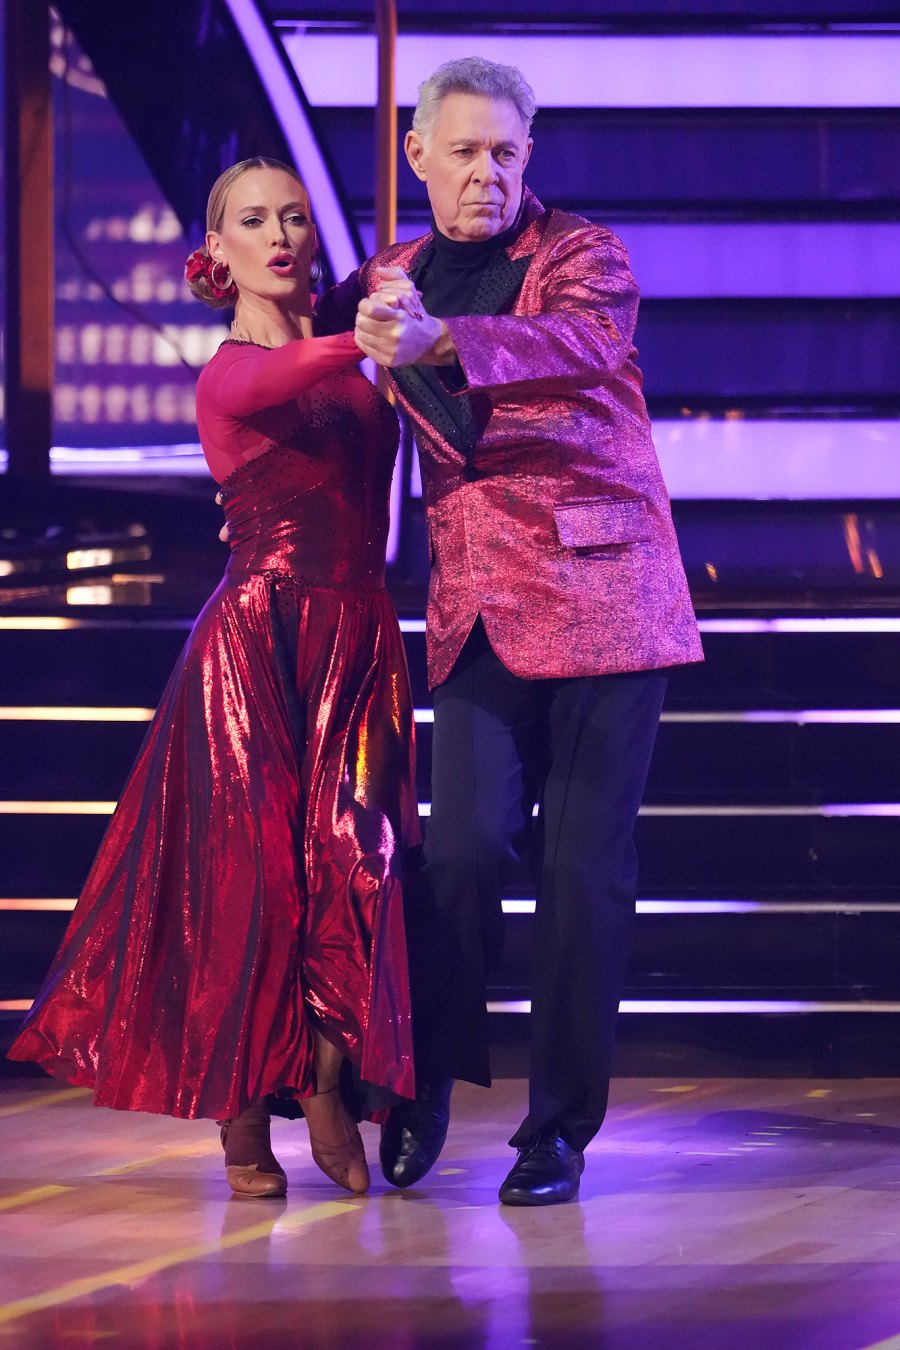 Barry Williams and Peta Murgatroyd Which Duo Was Eliminated During Dancing With the Stars Motown Night